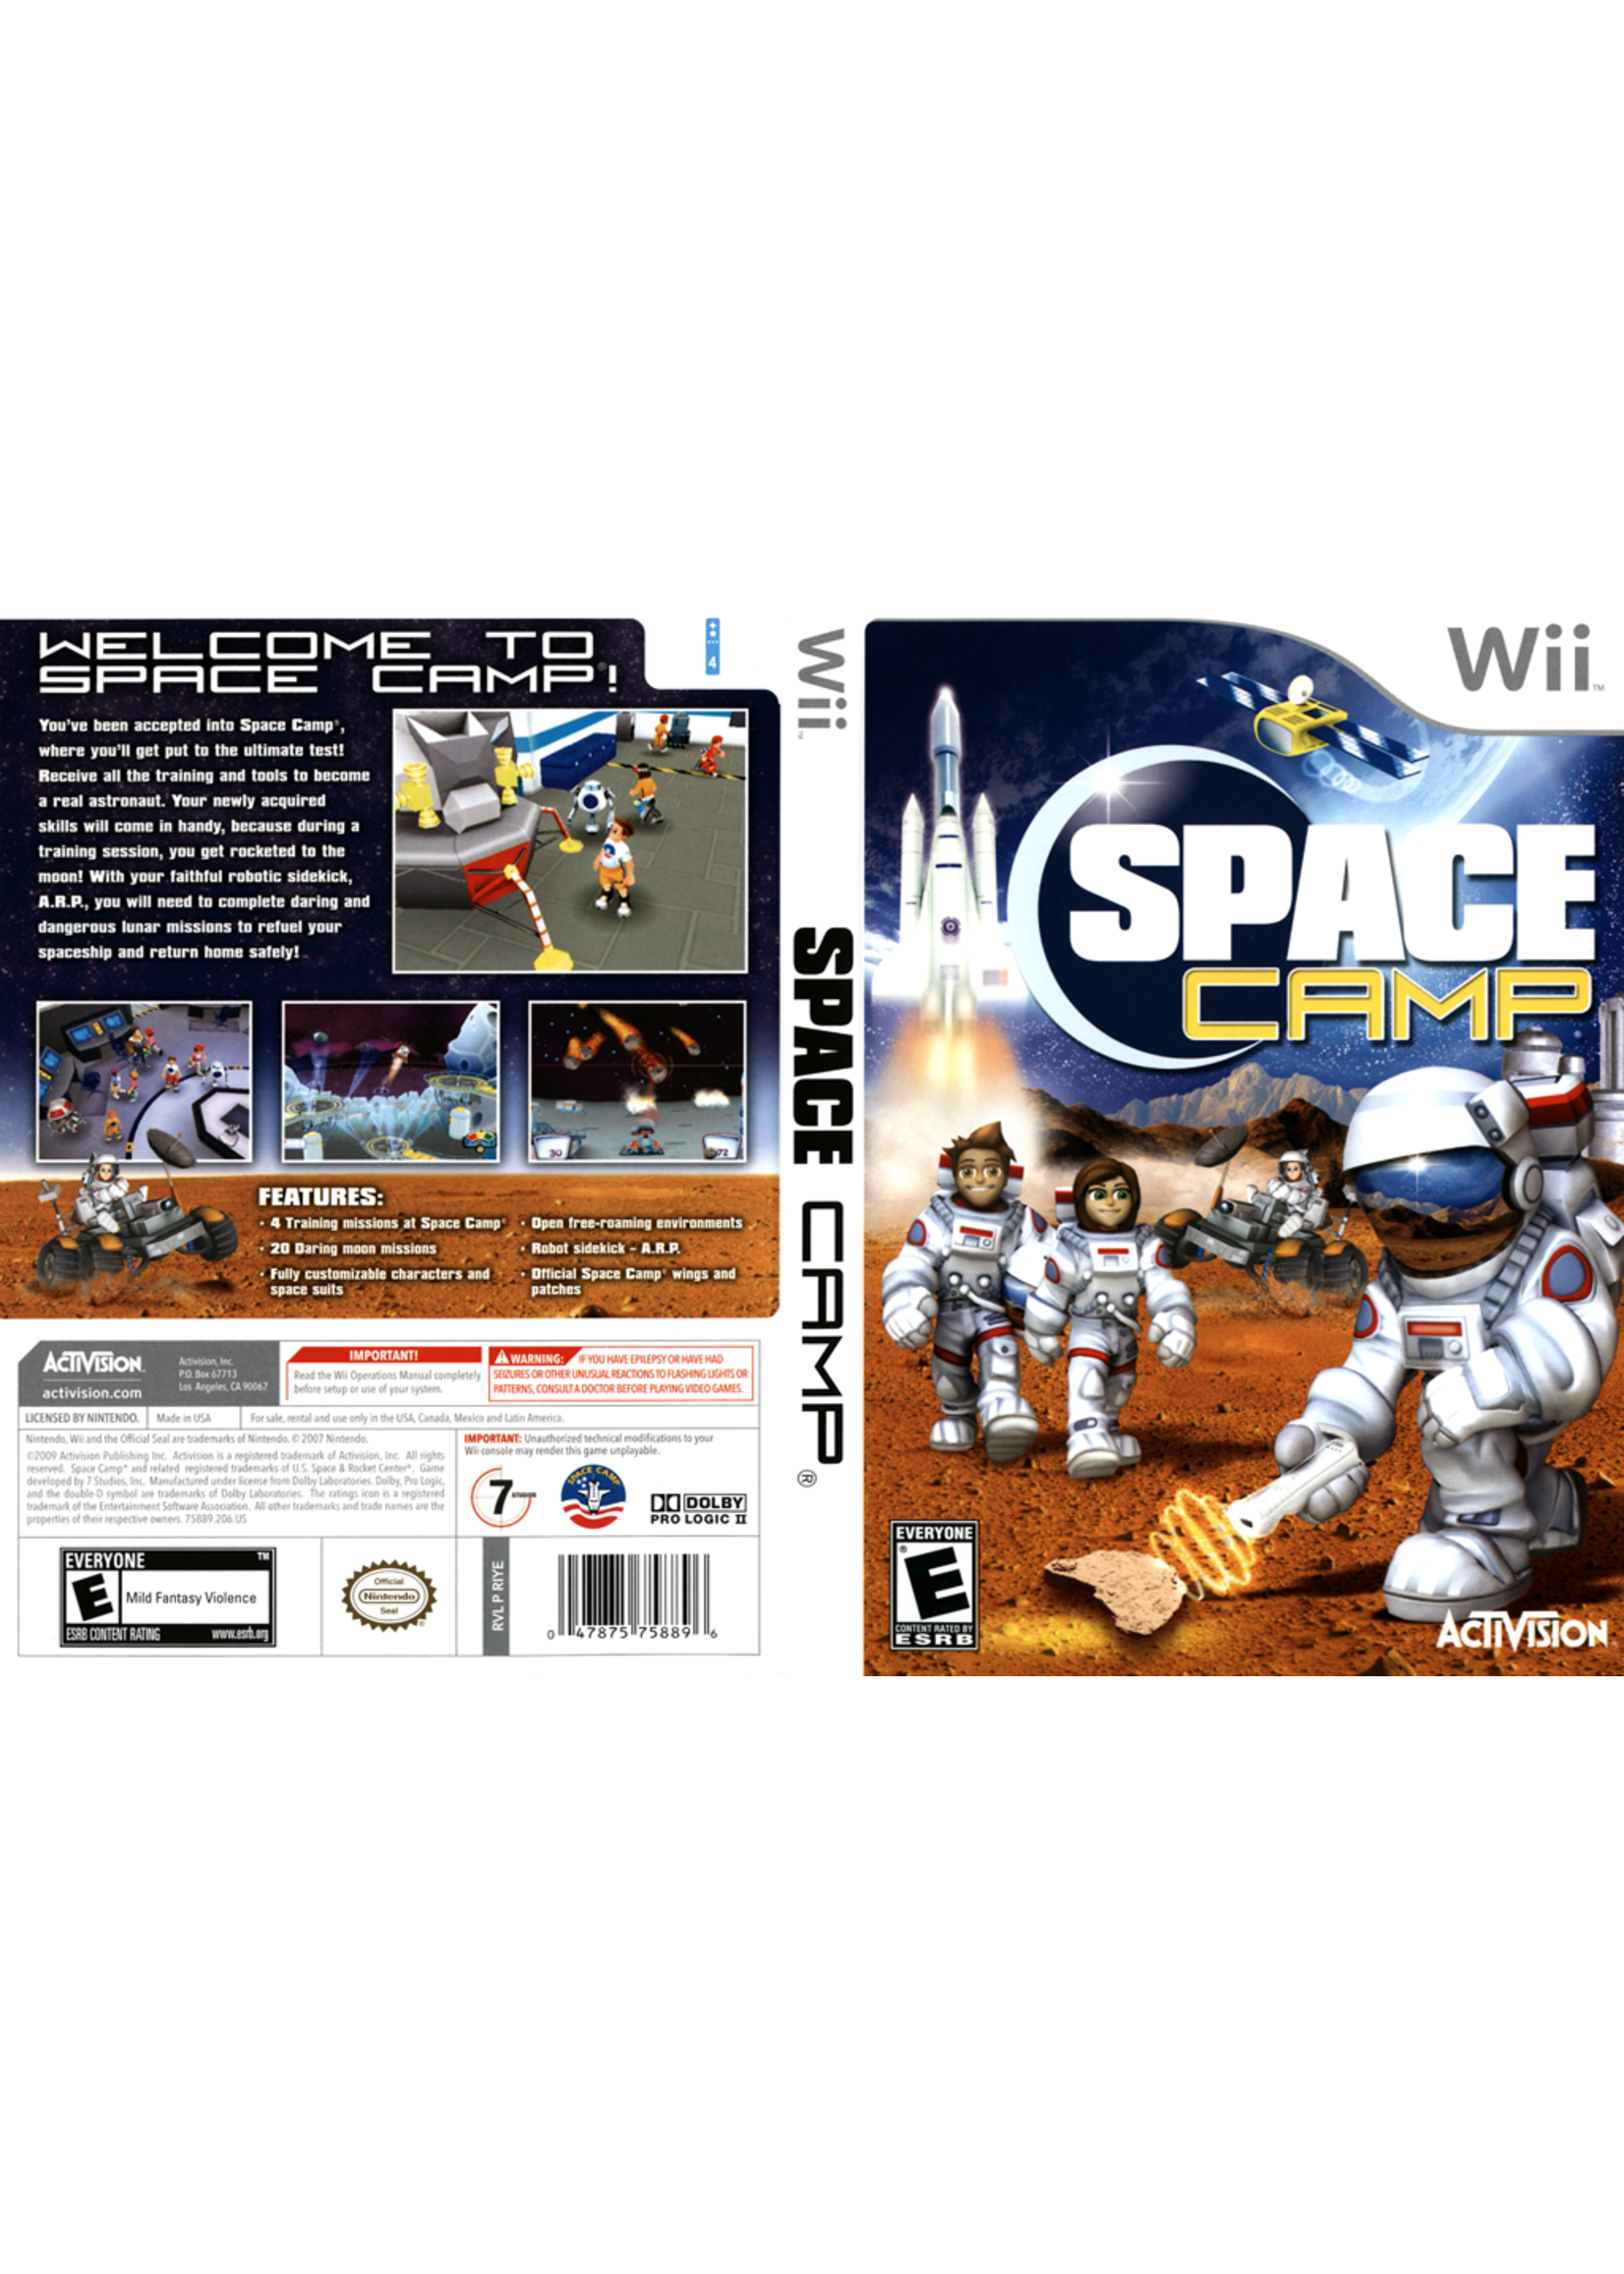 Nintendo Wii Space Camp